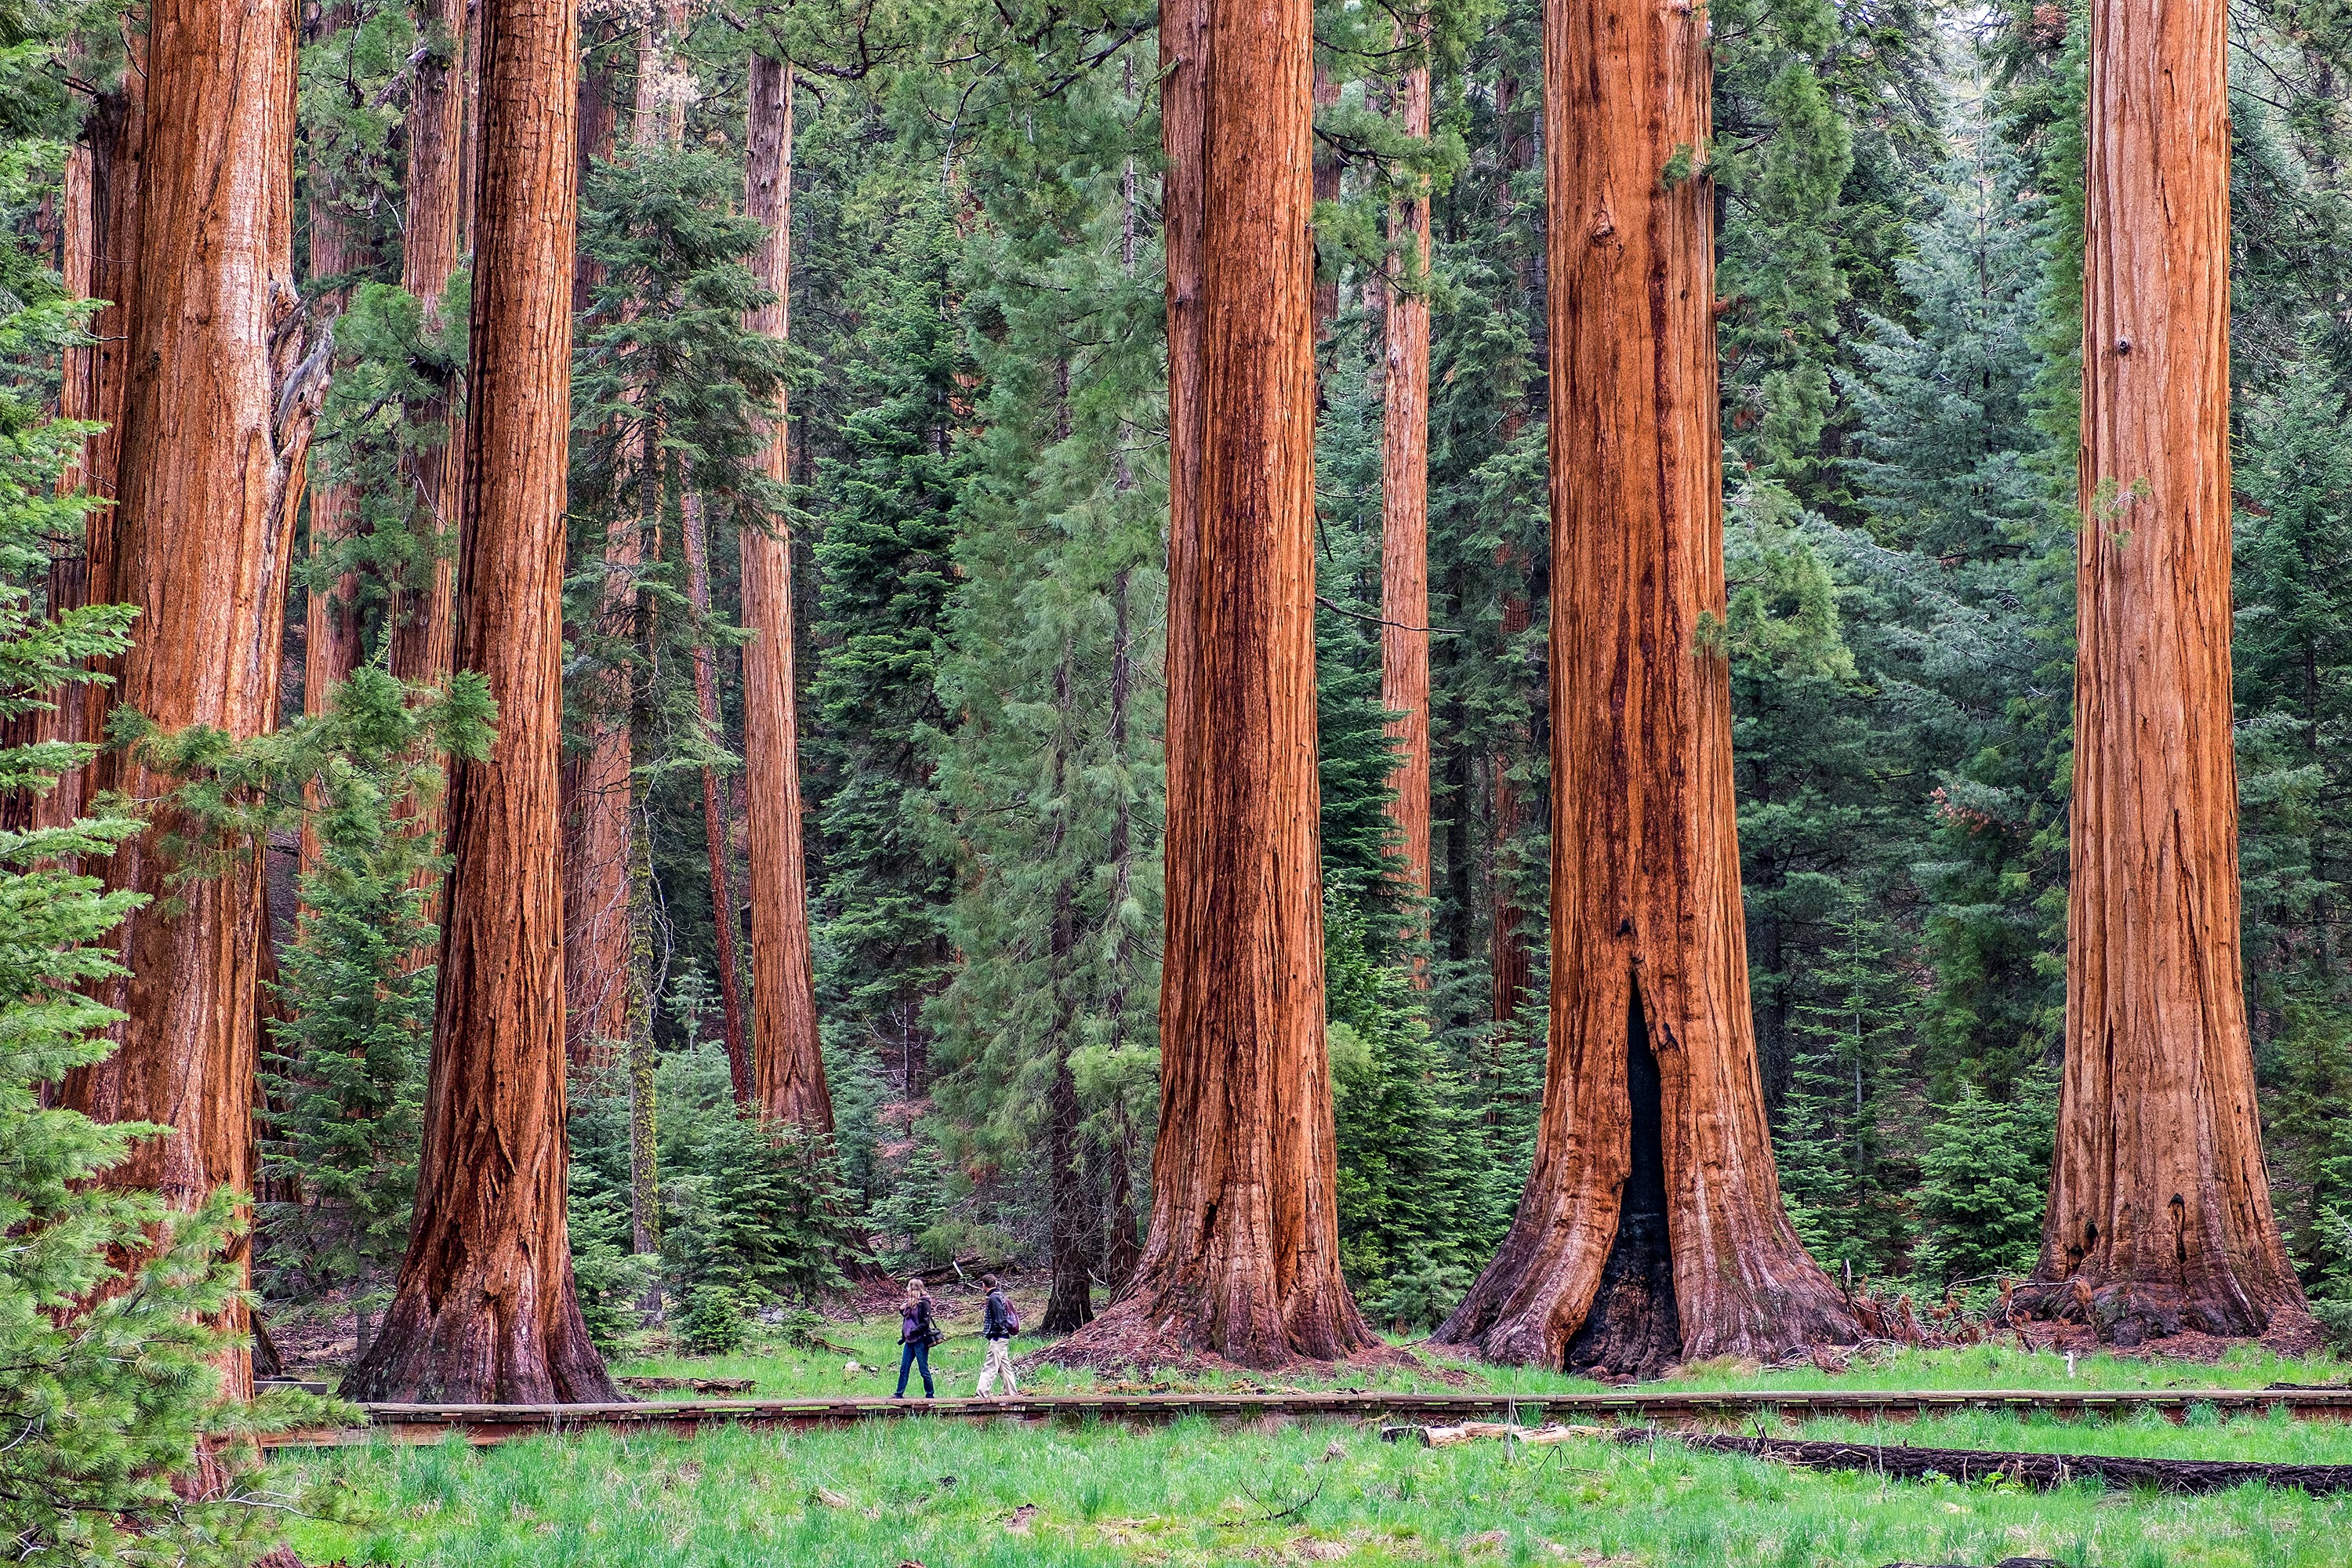 Sequoia: Home of the Giant Forest